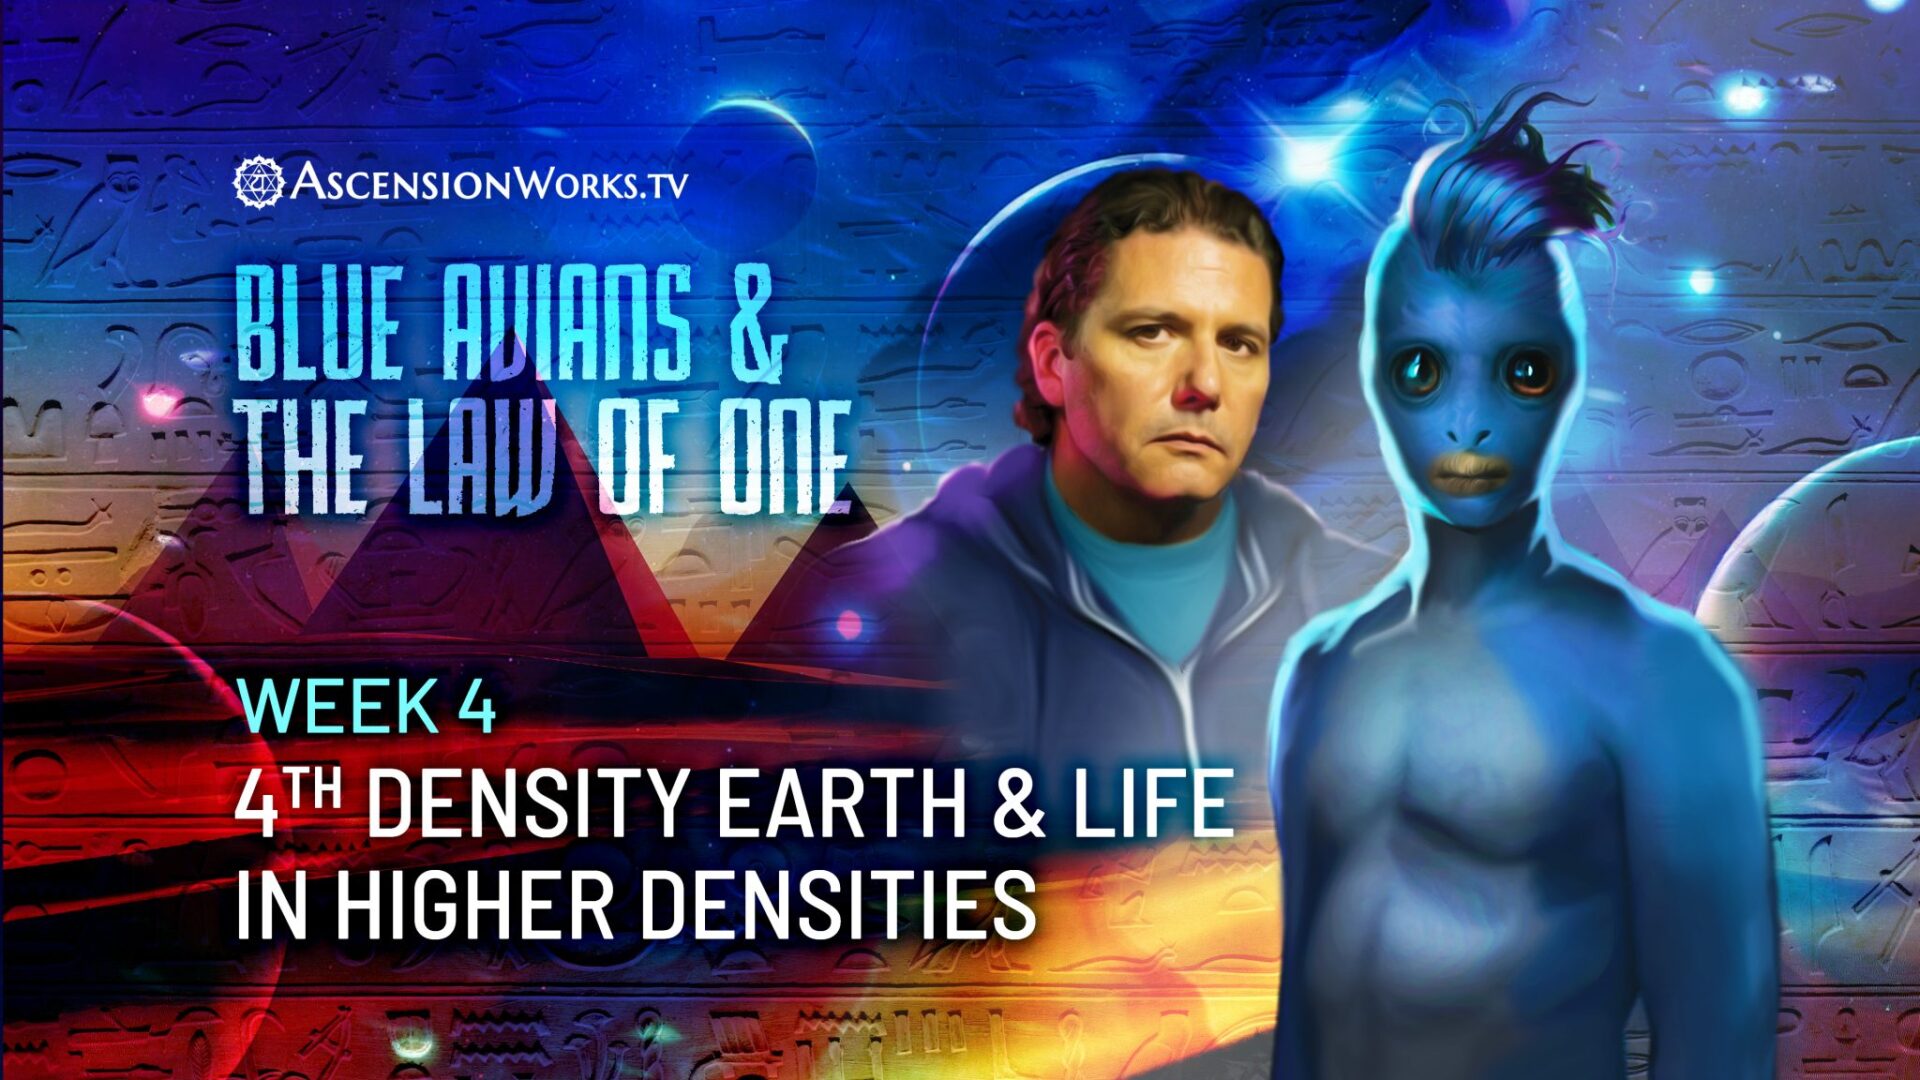 Blue avians and the law of one 5 week course with Corey Goode. Week 4: Fourth Density Earth & Life in Higher Densities